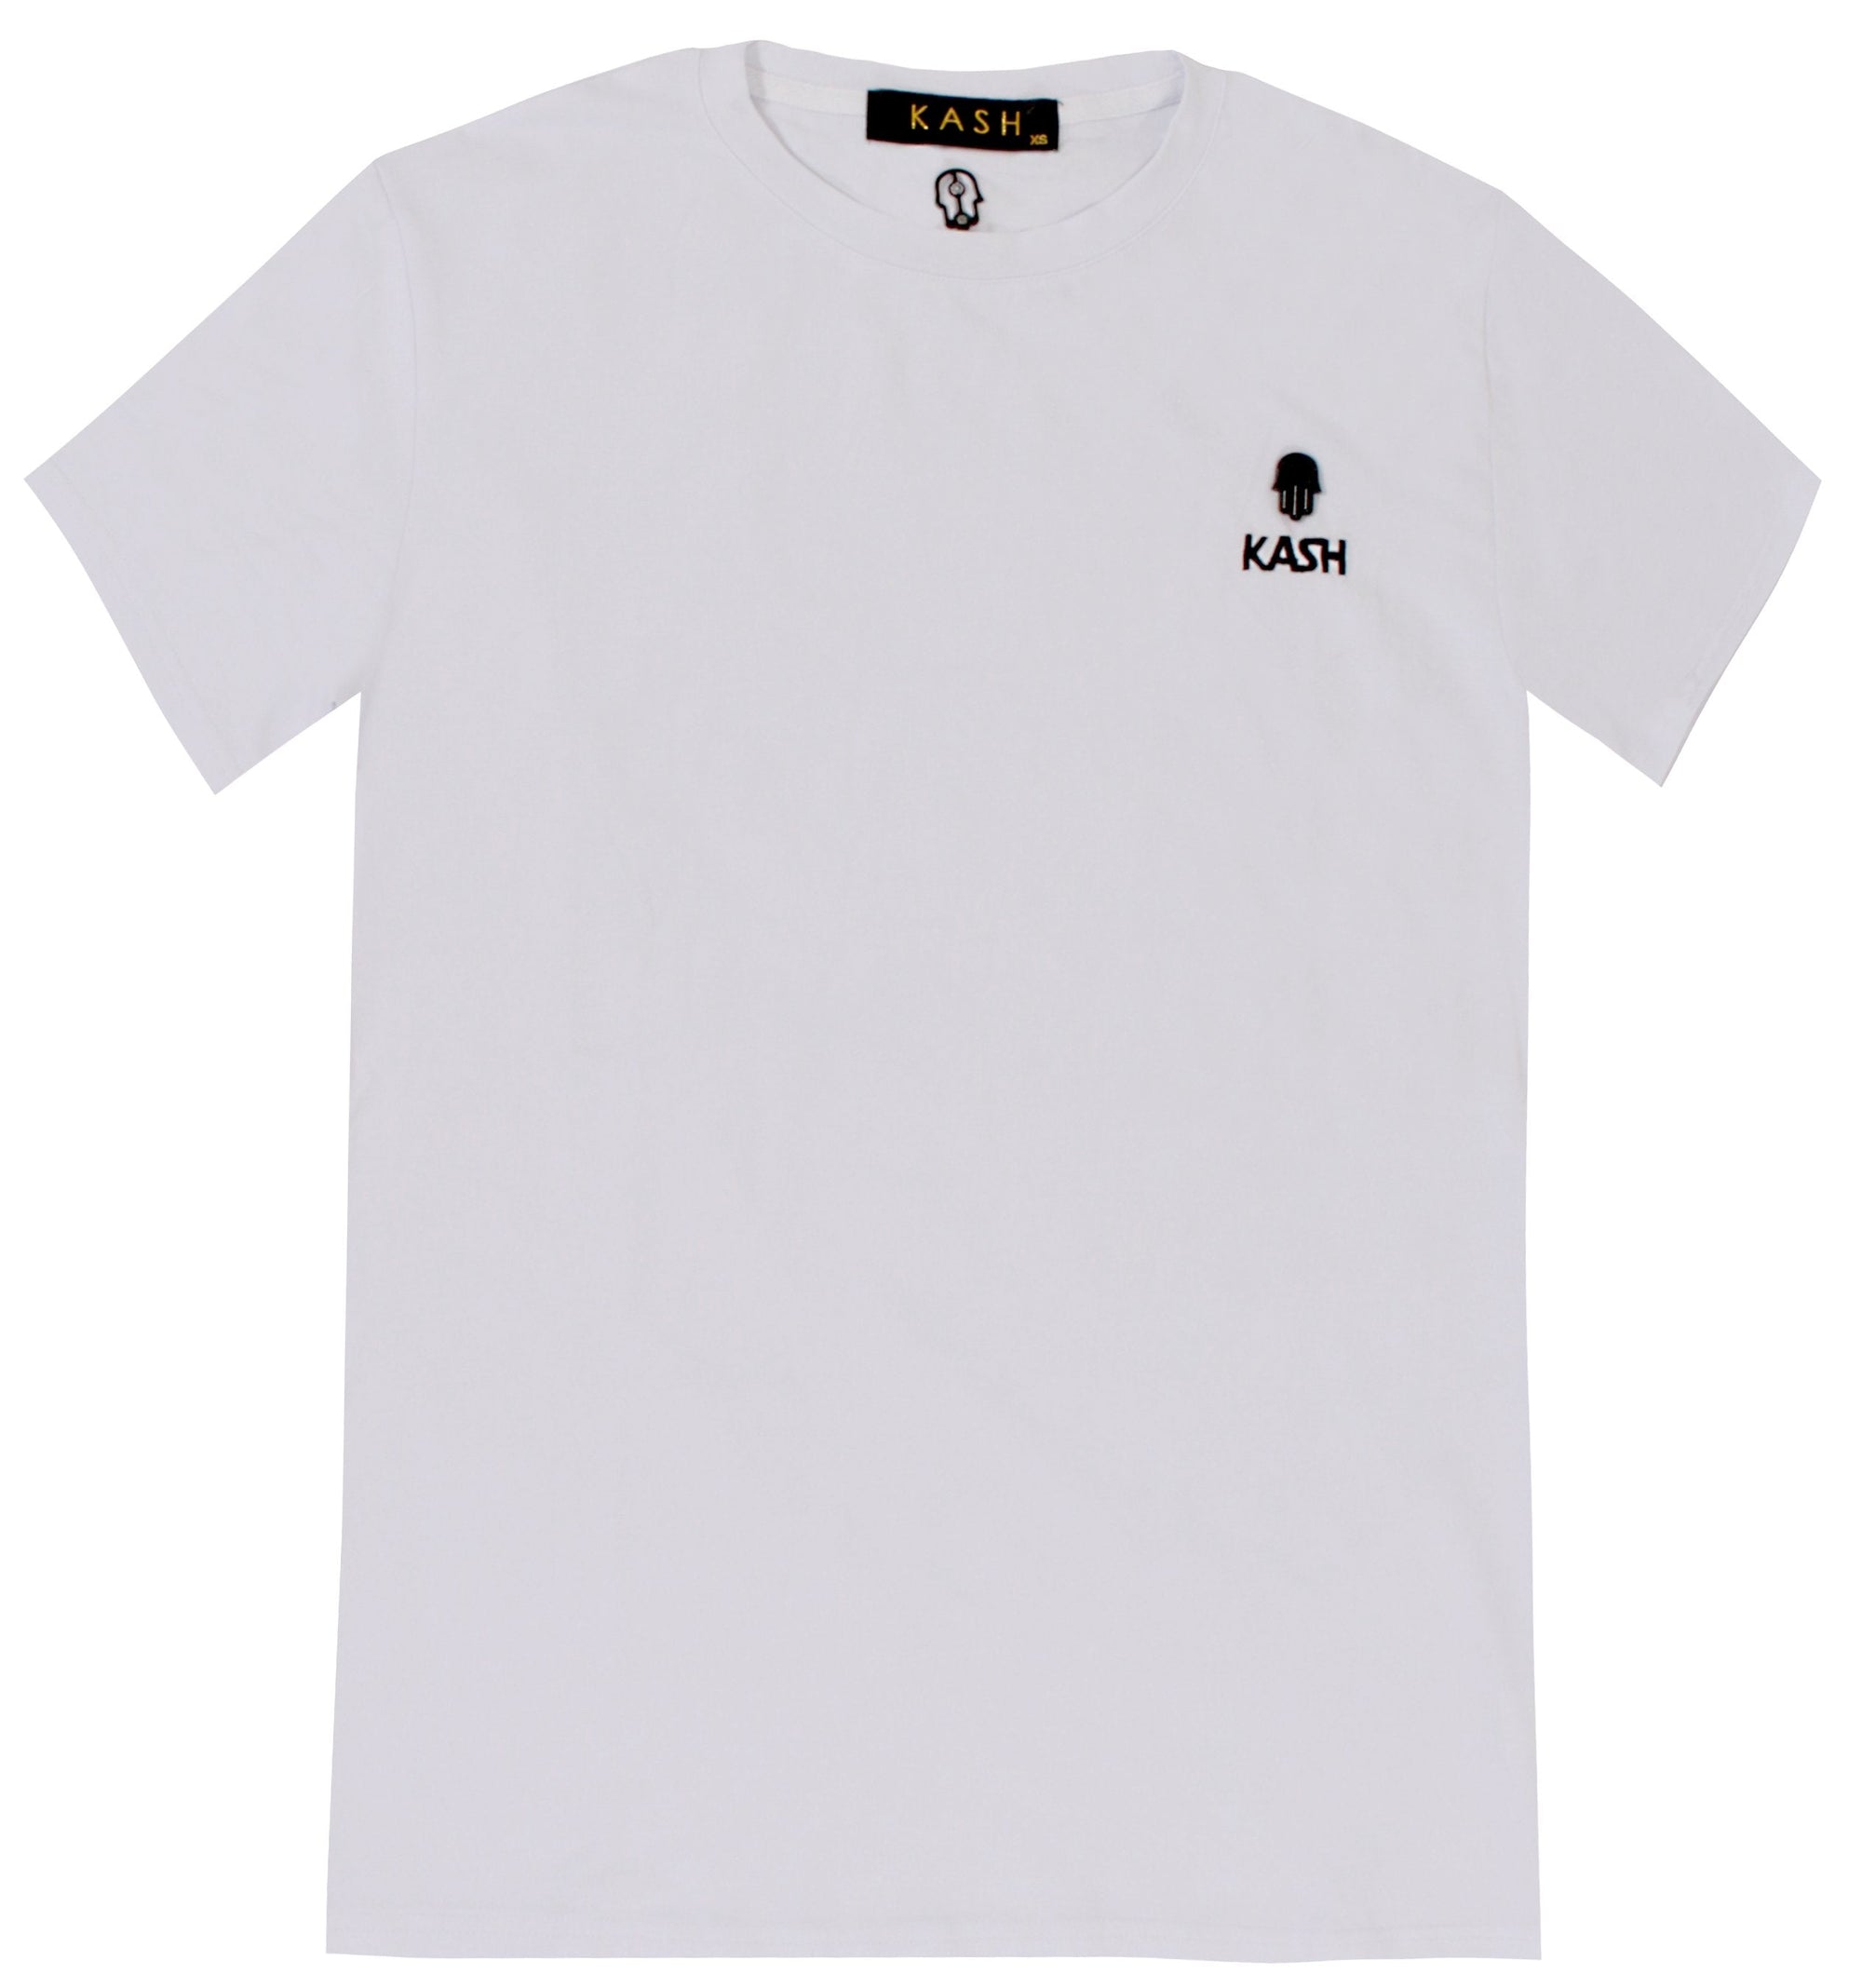 Kash Embroidered Short Sleeve Tee - White